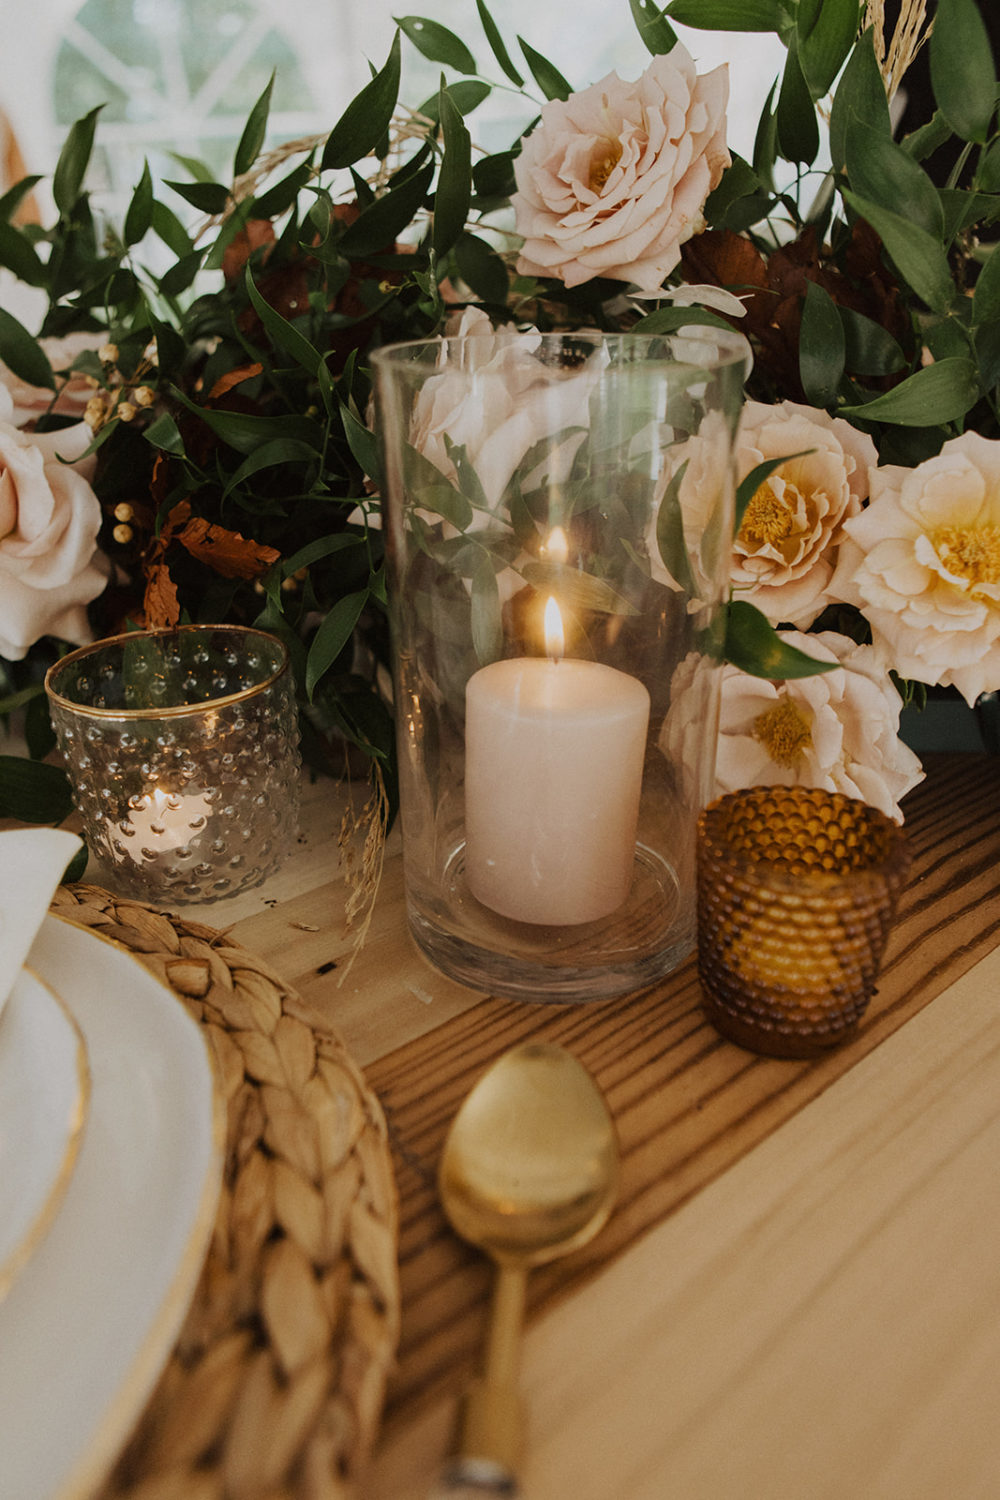 Lit candle in vase beside wedding flowers on reception table